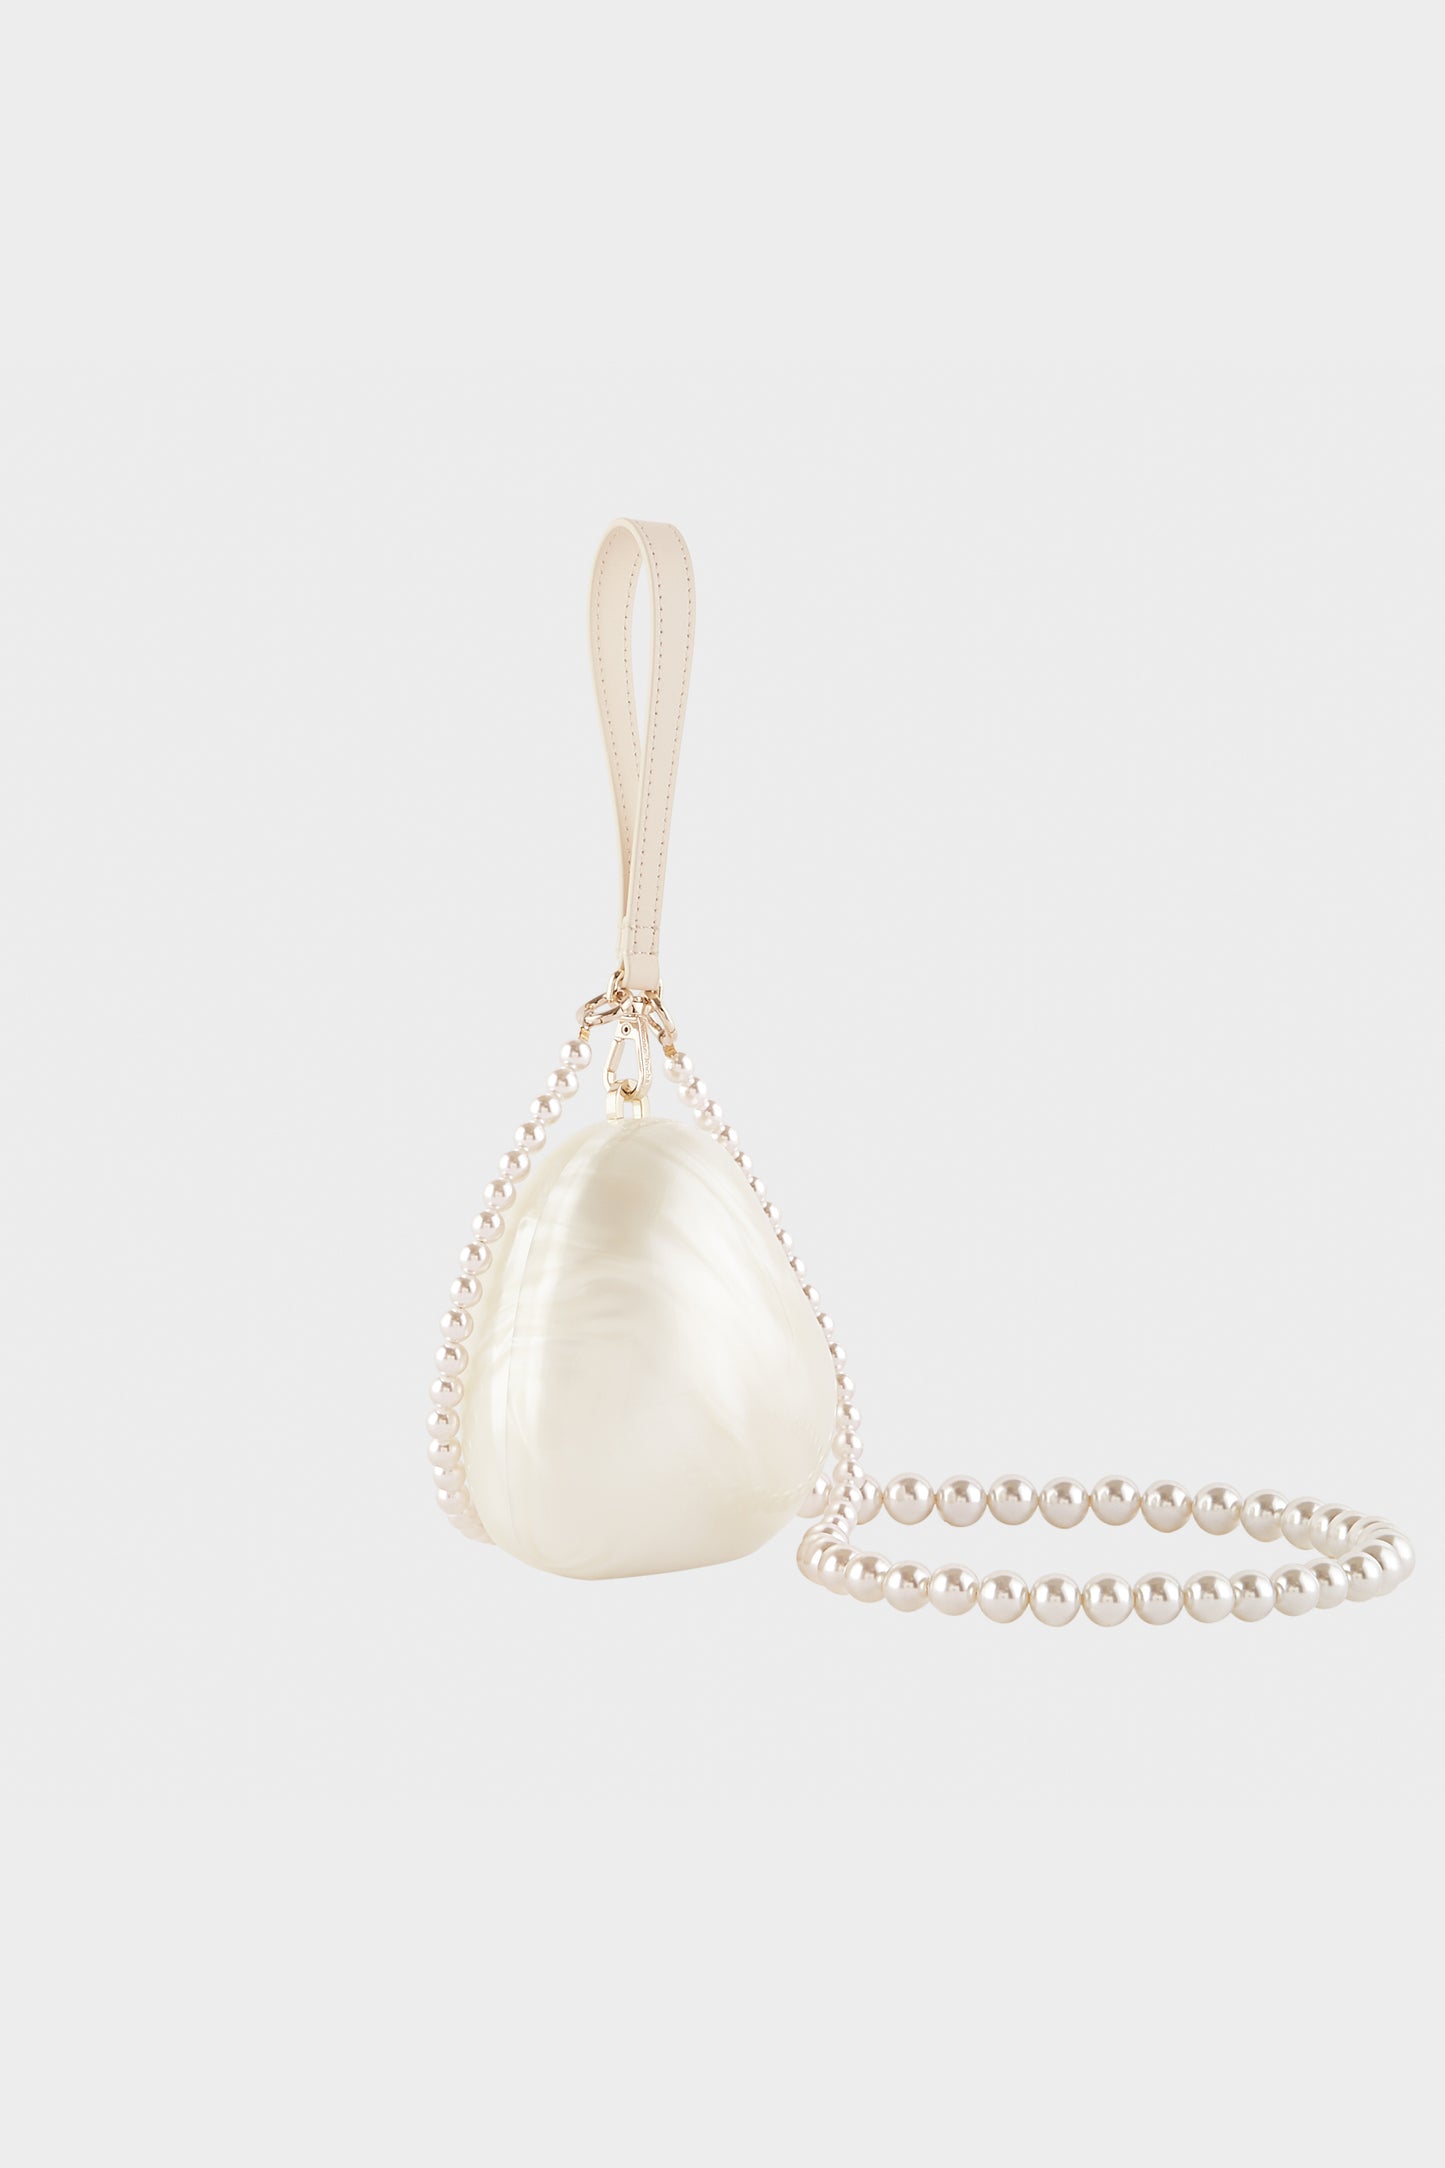 Micro Heart Bag with Pearl Strap